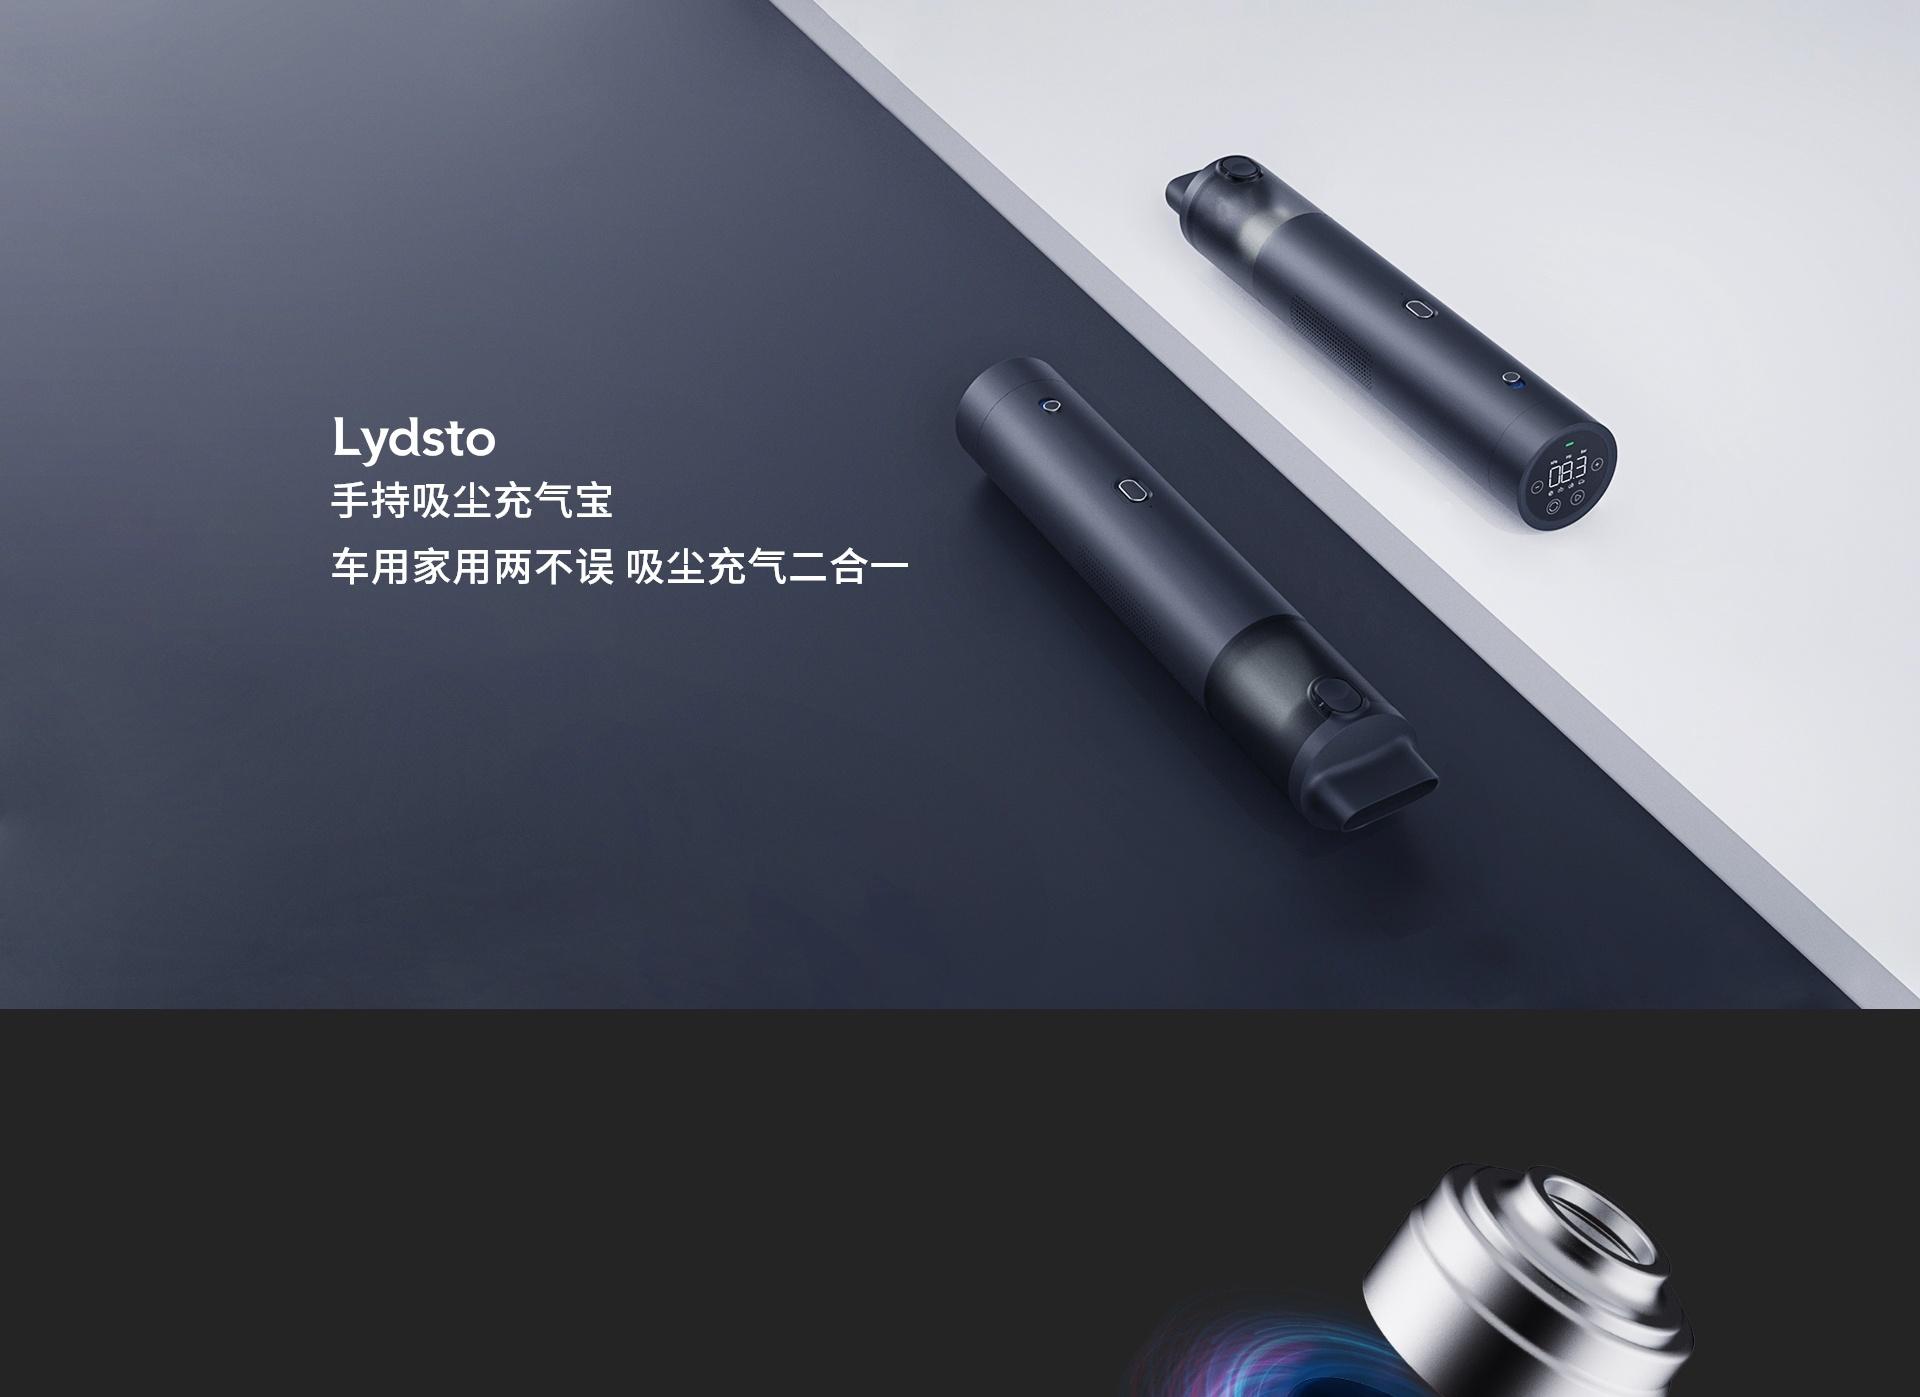 This is the lydsto product image